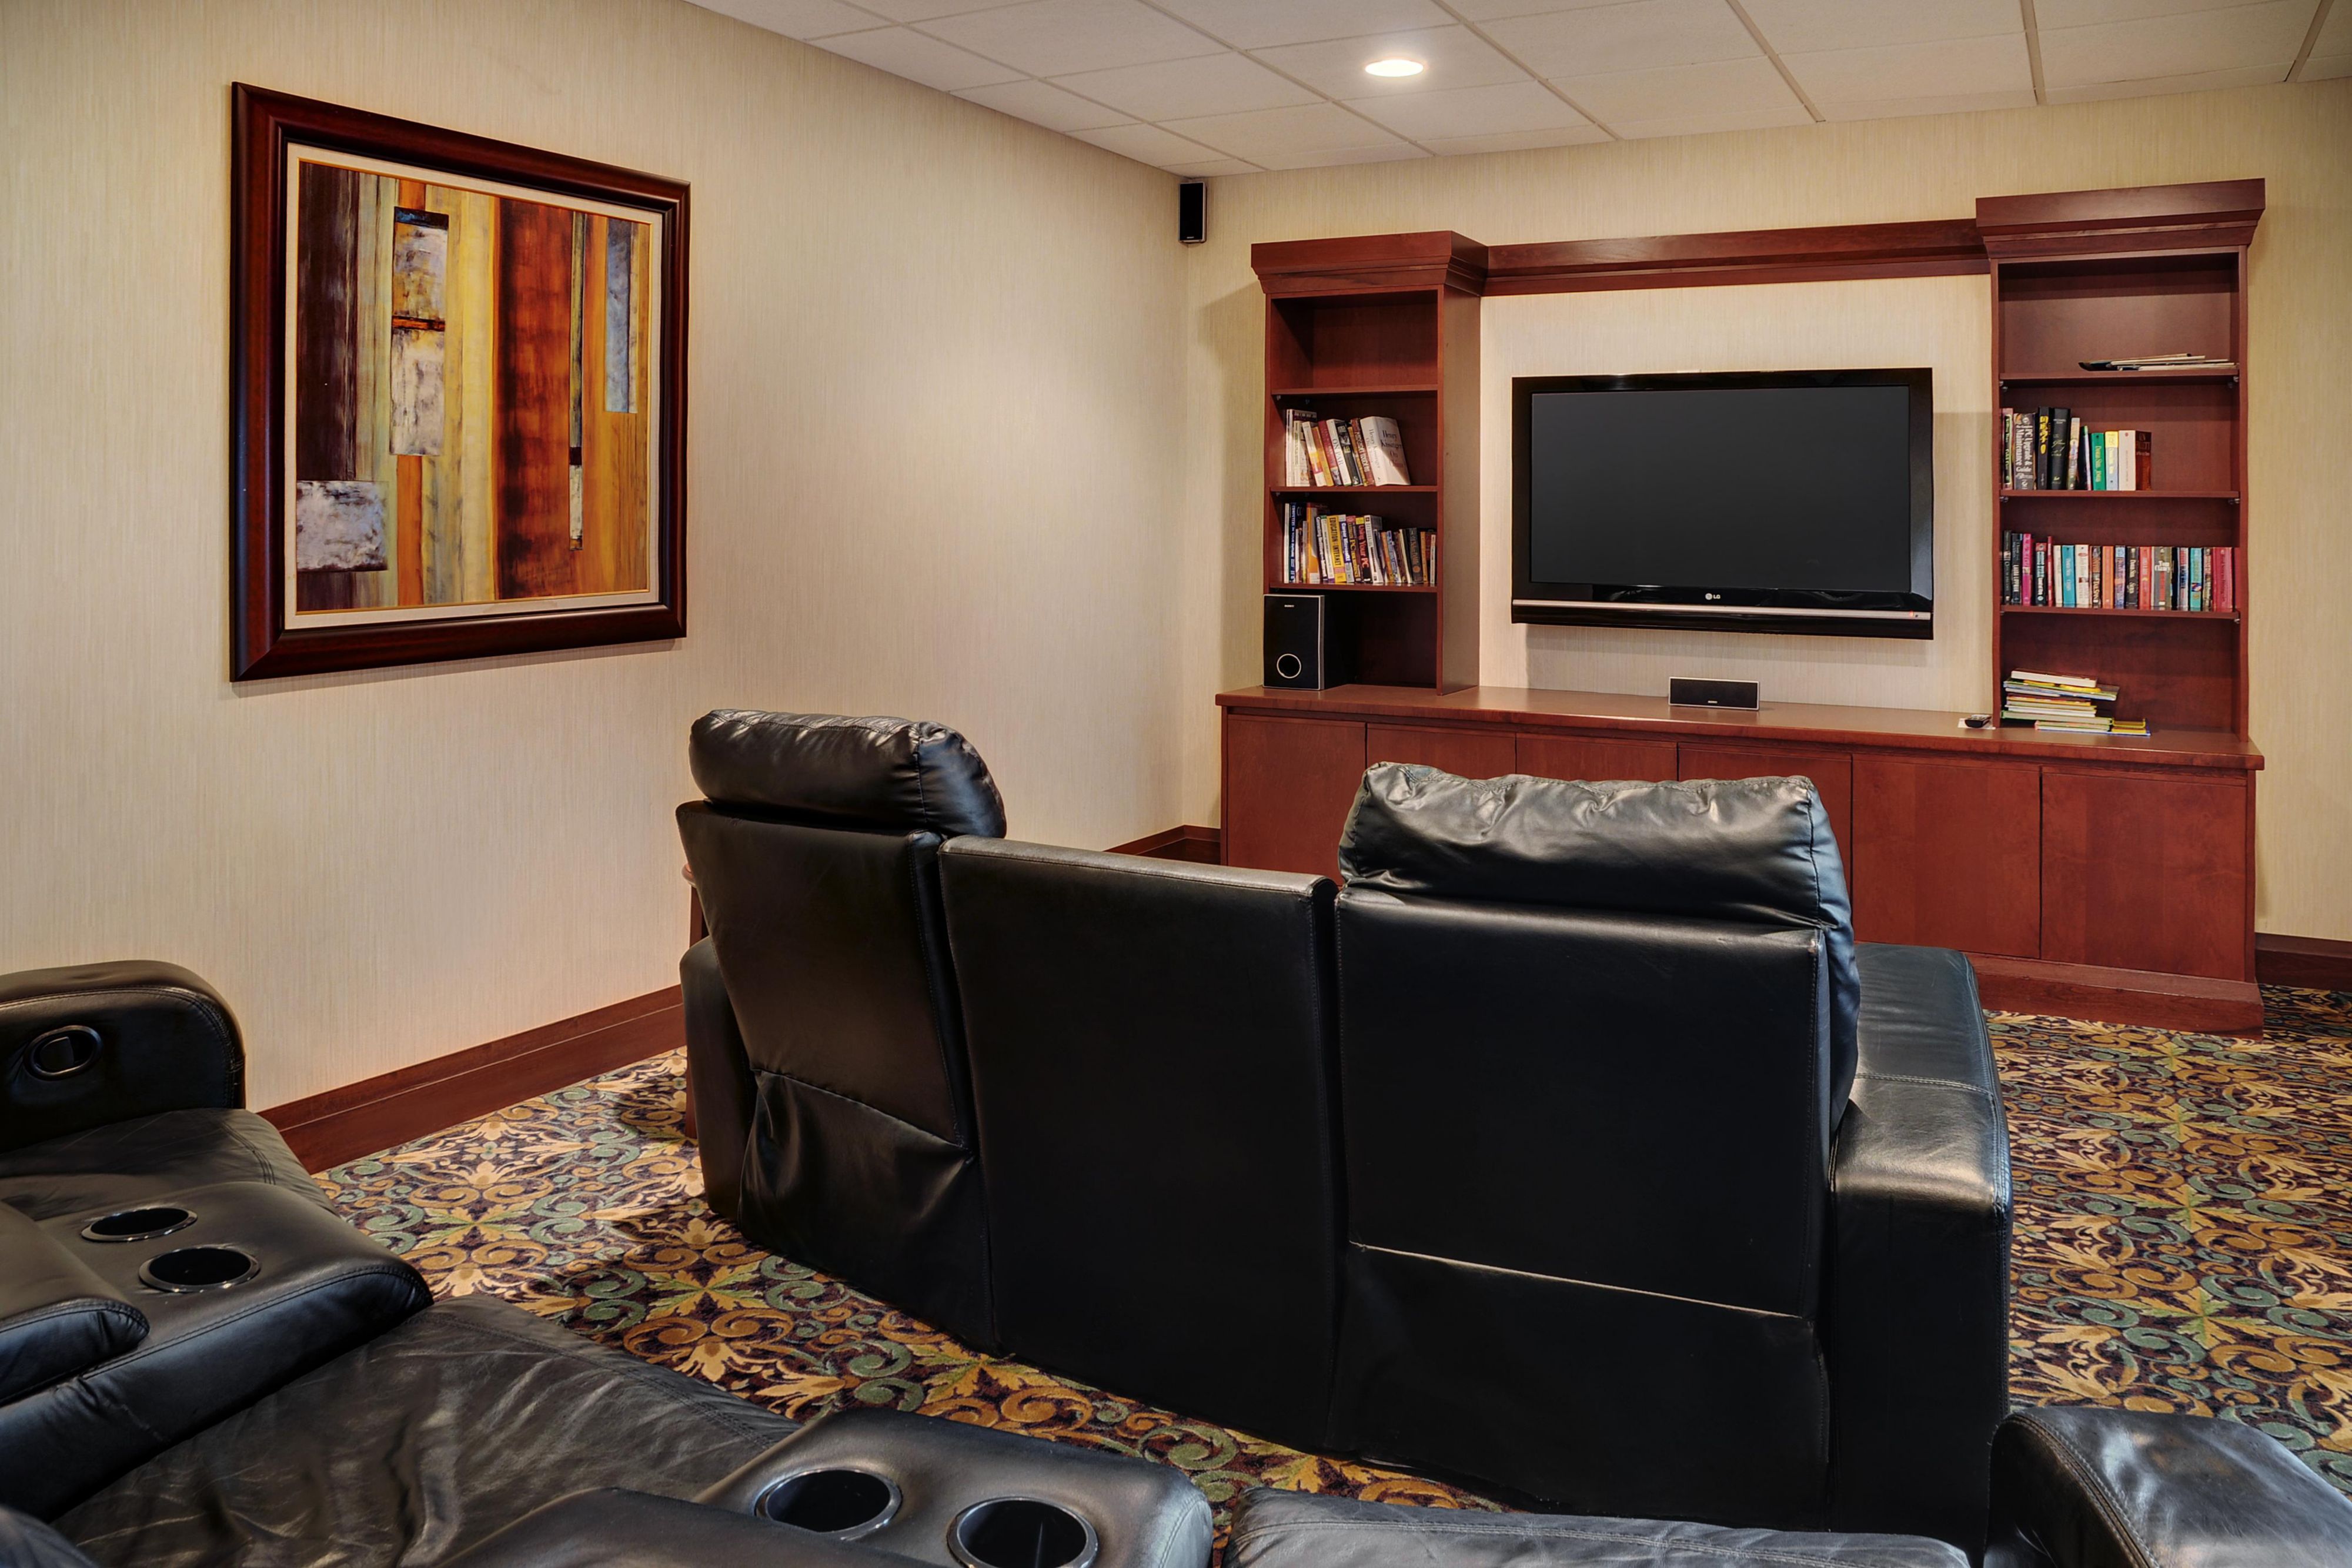 One of our popular amenities for kids is our theatre style movie room, where they can watch variety of DVDs after a swim.